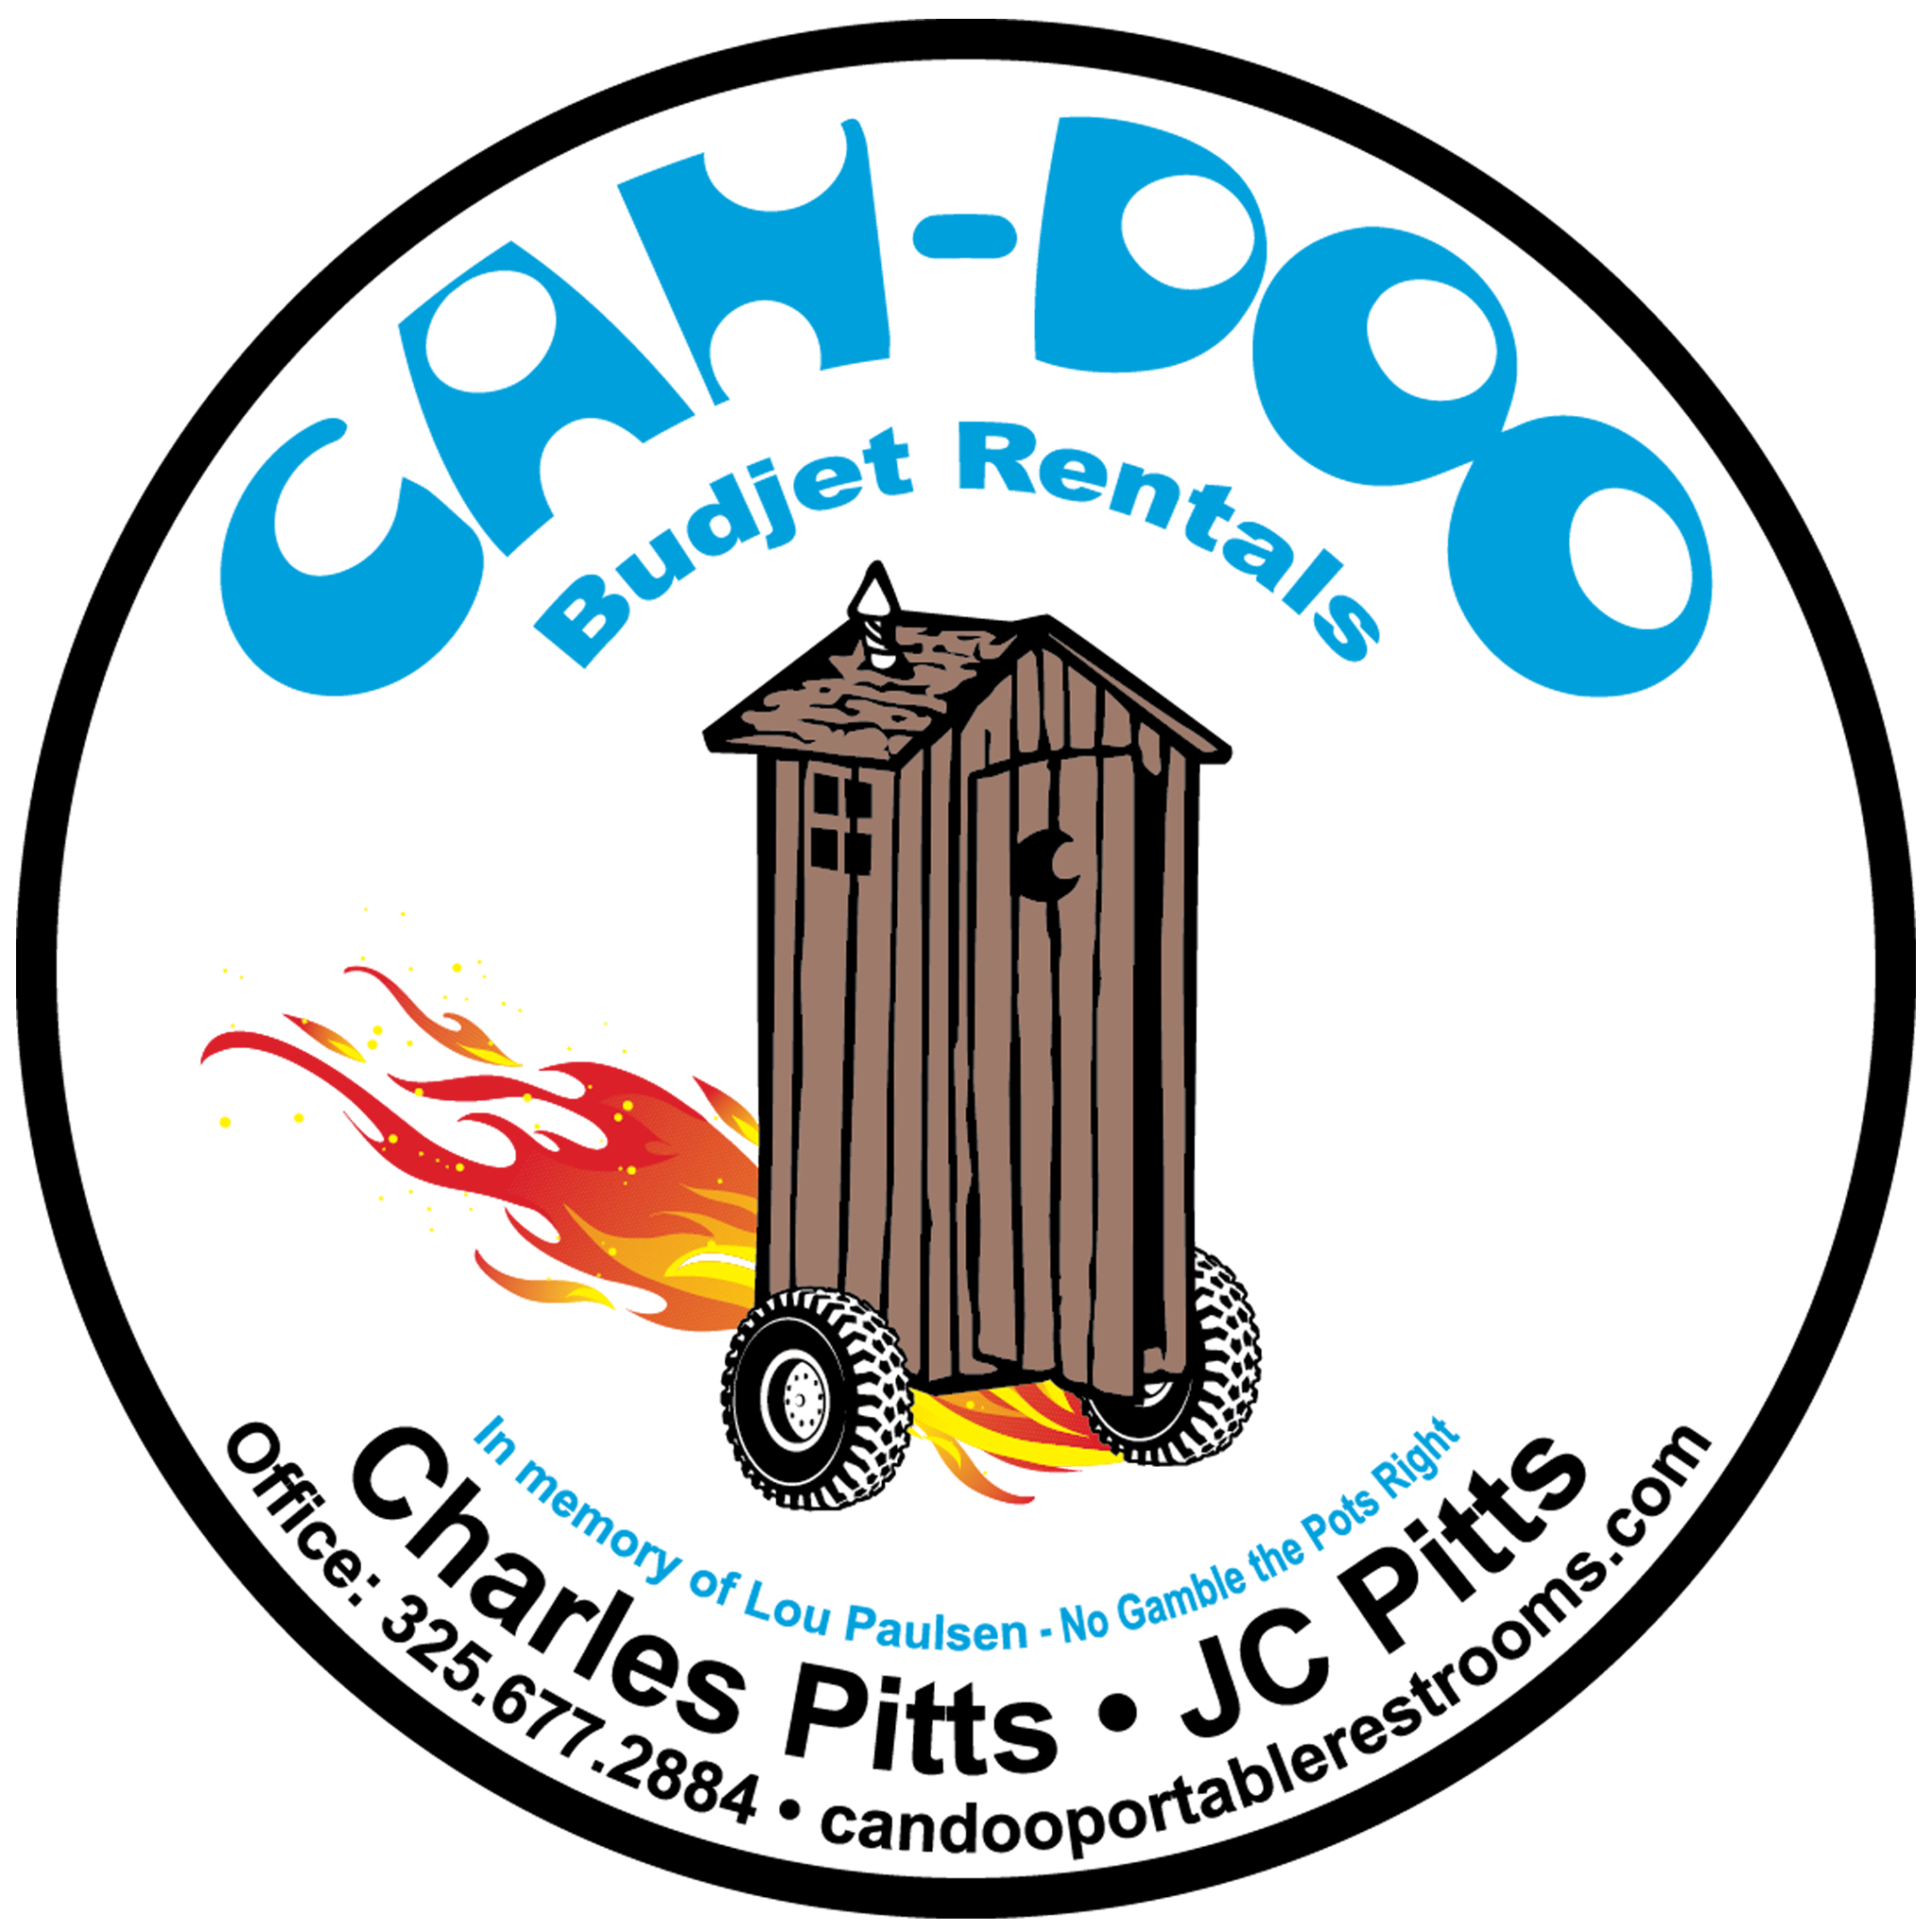 Can-Doo Portable Restrooms